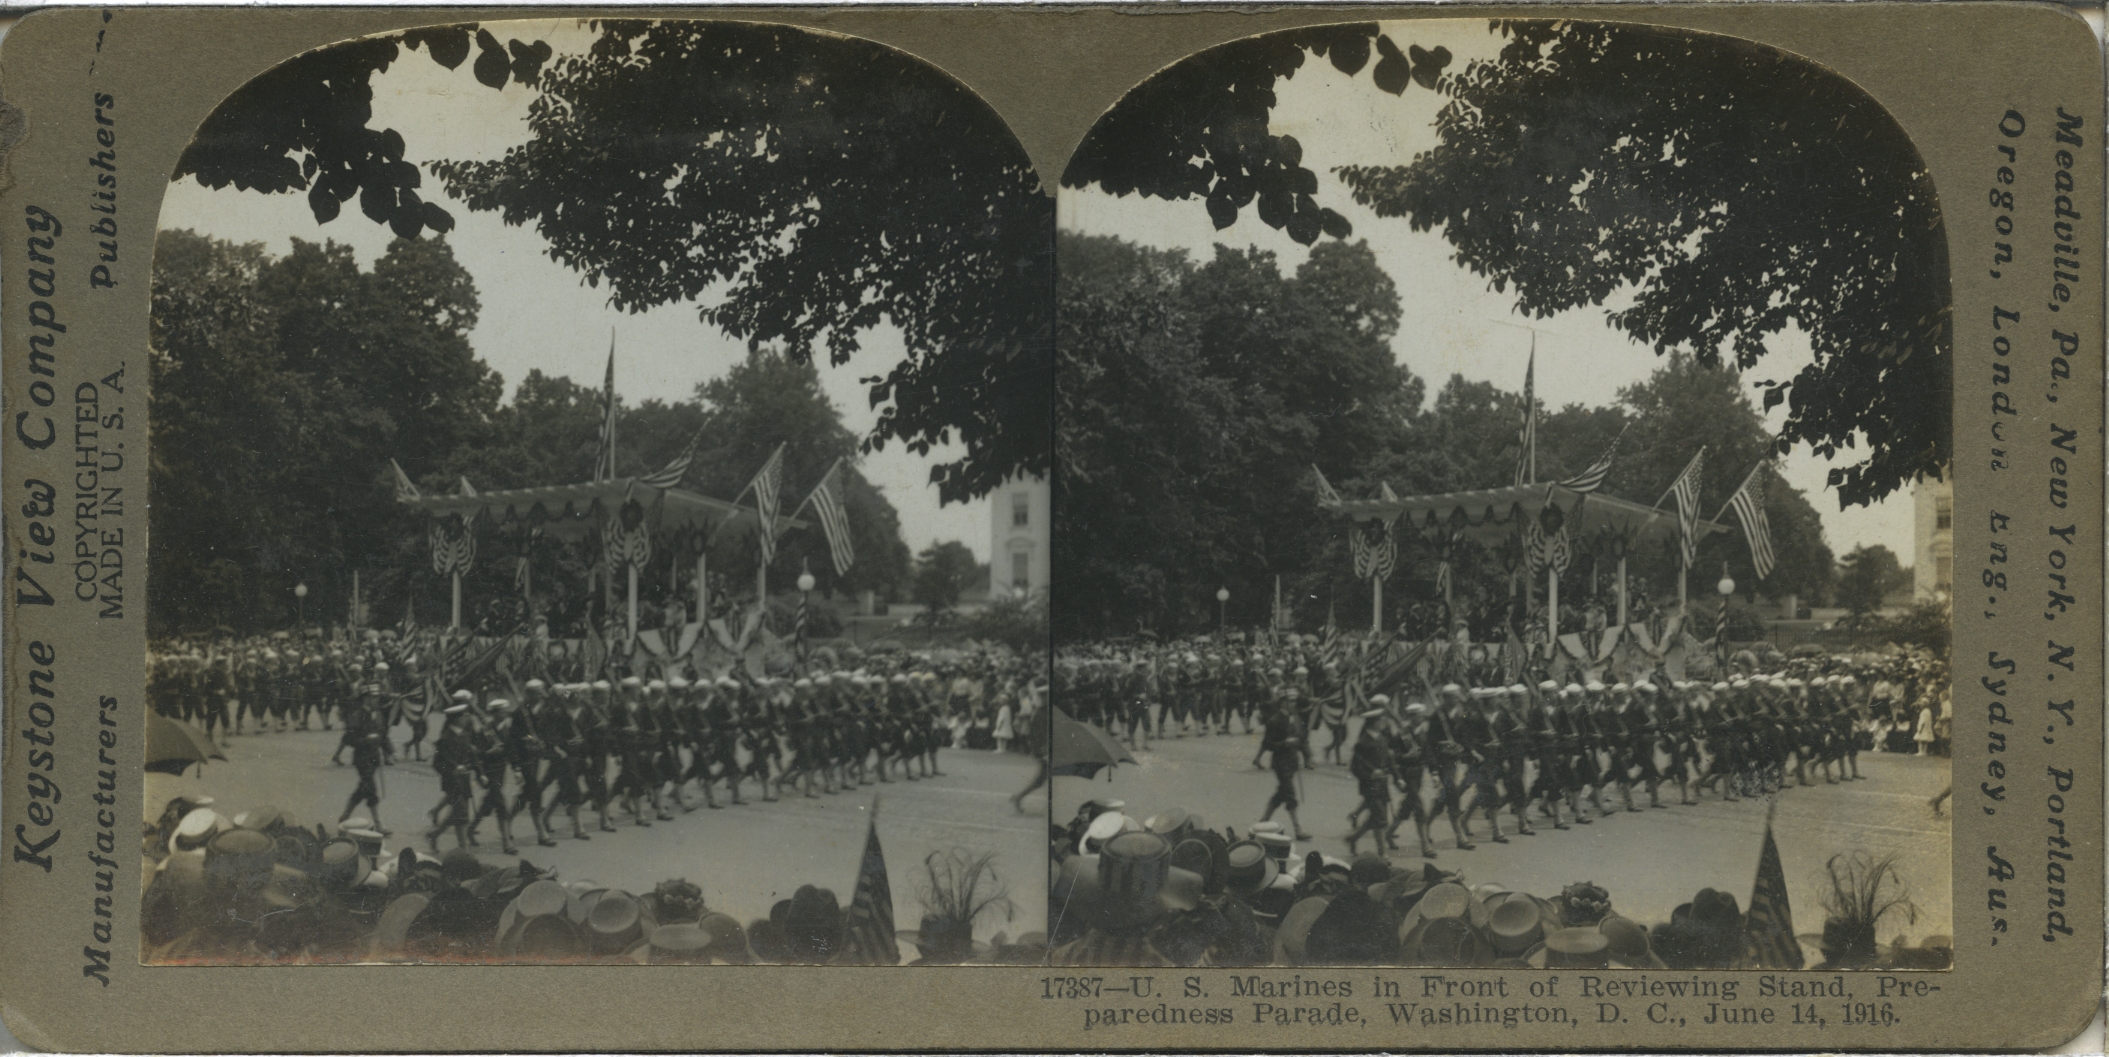 U.S. Marines in Front of Reviewing Stand, Preparedness Parade, Washington, D.C. June 14th, 1916